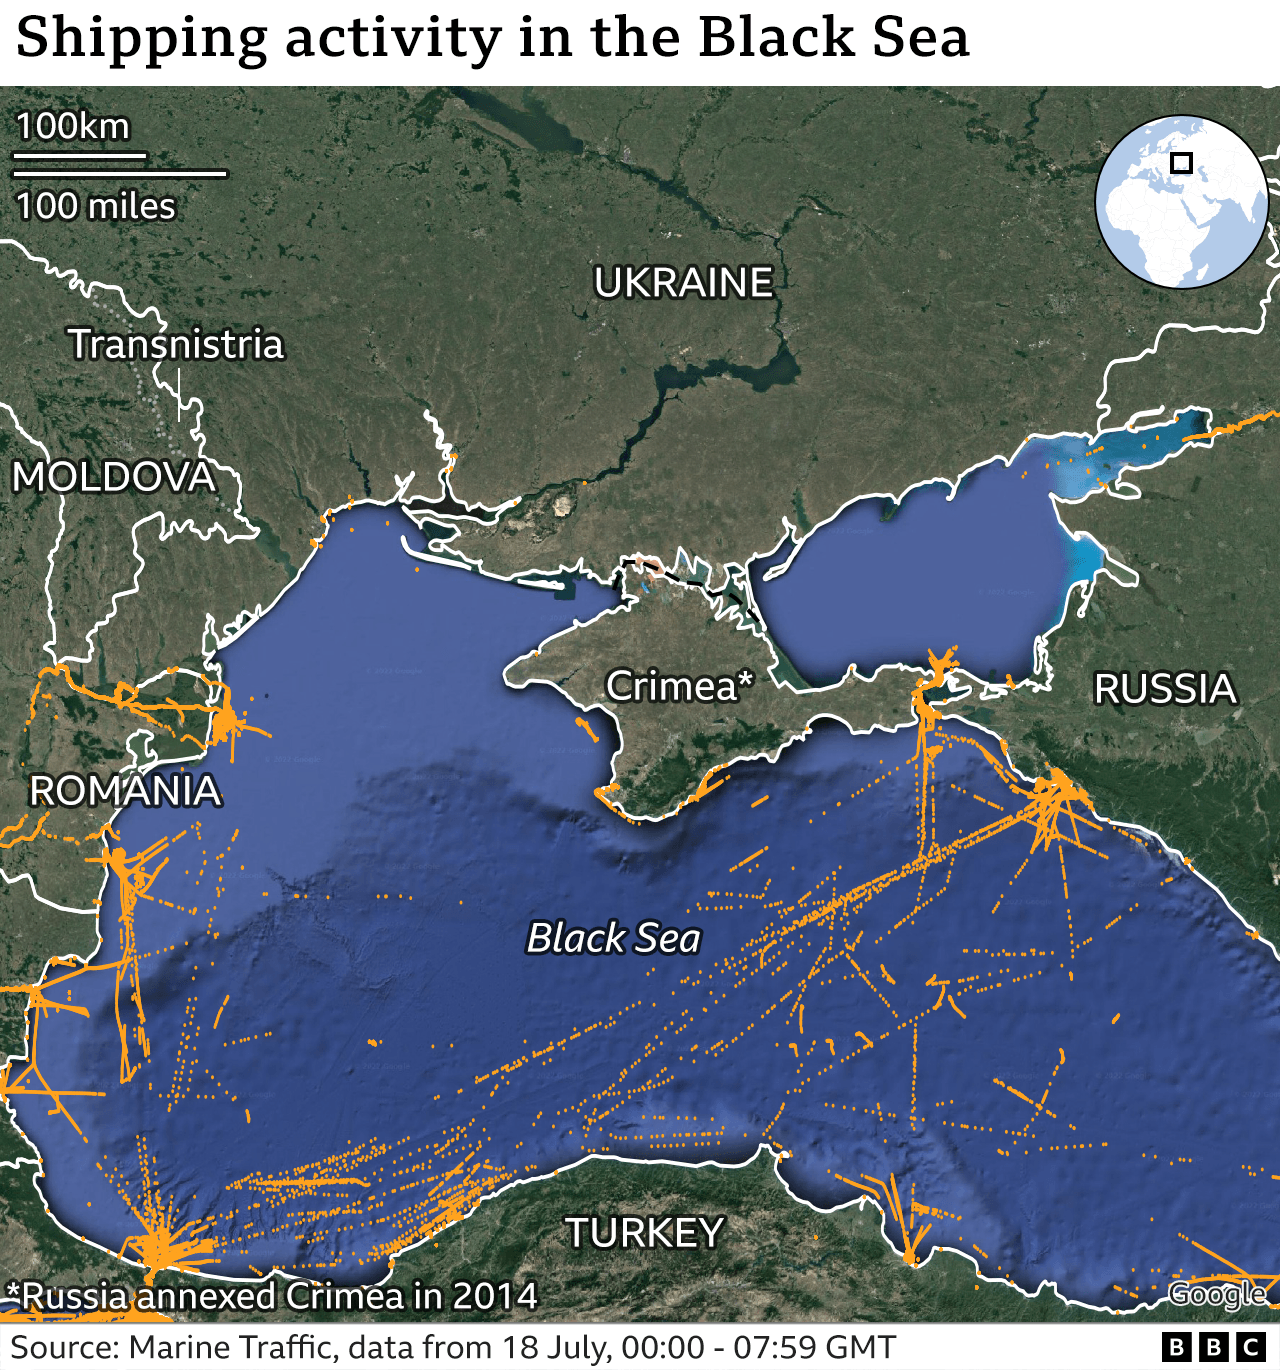 Map showing shipping activity in the Black Sea